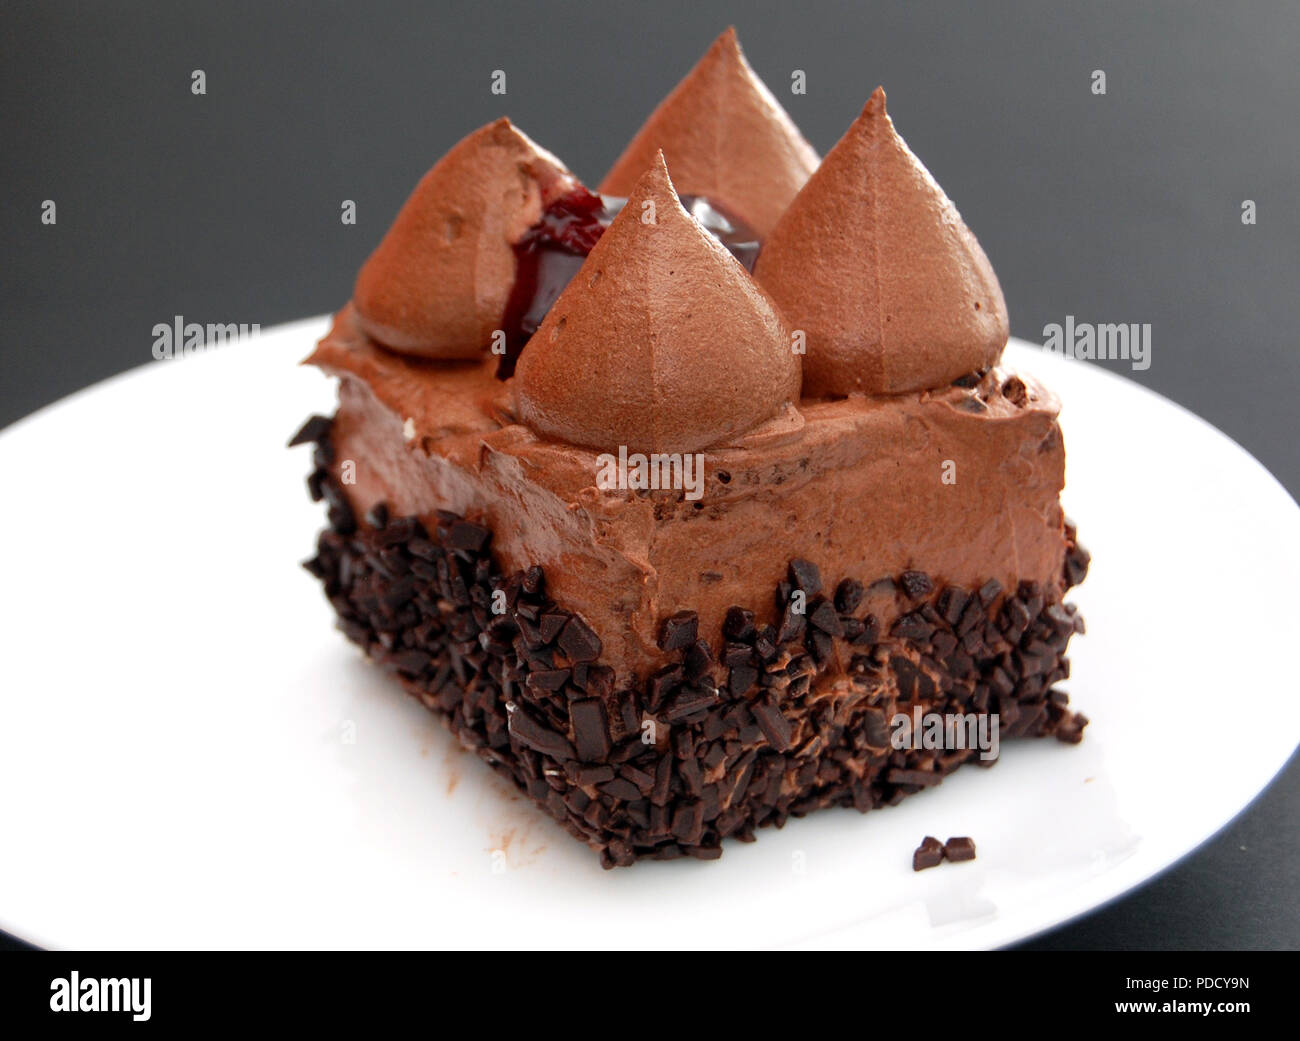 chocolate cake with dome shaped cocoa decoration,image Stock Photo - Alamy